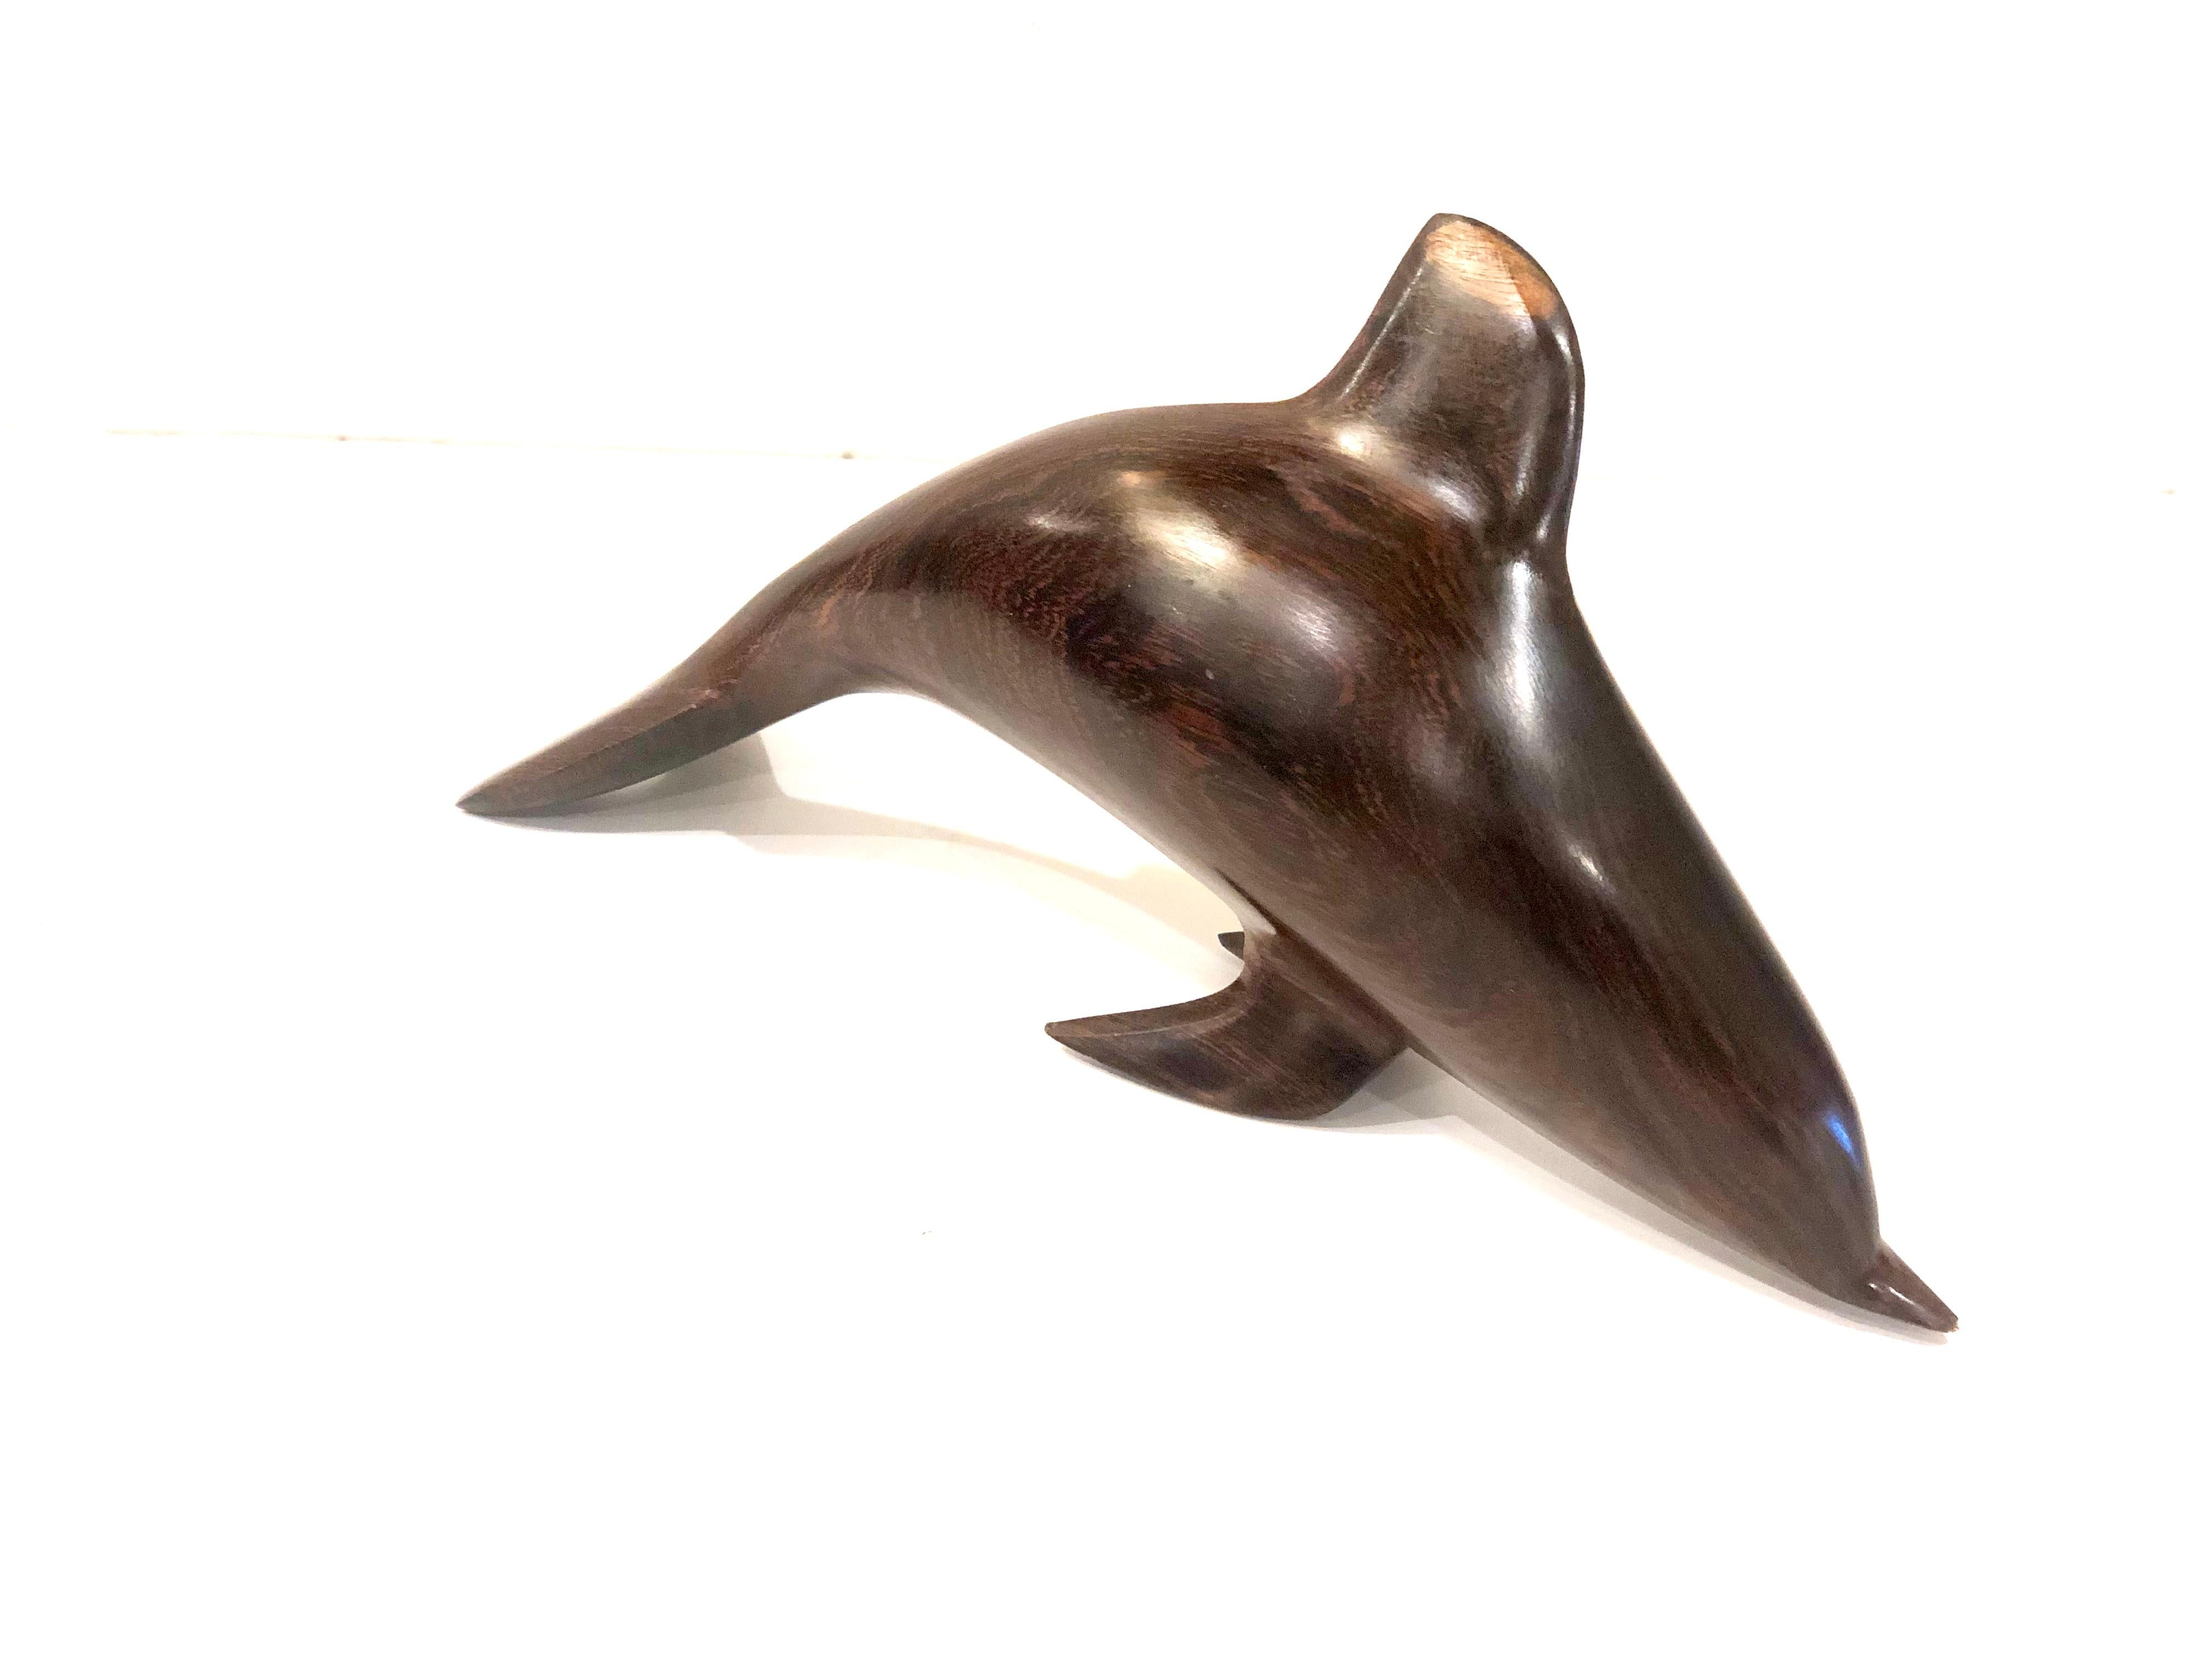 American Solid Rosewood Handcrafted Dolphin Sculpture For Sale